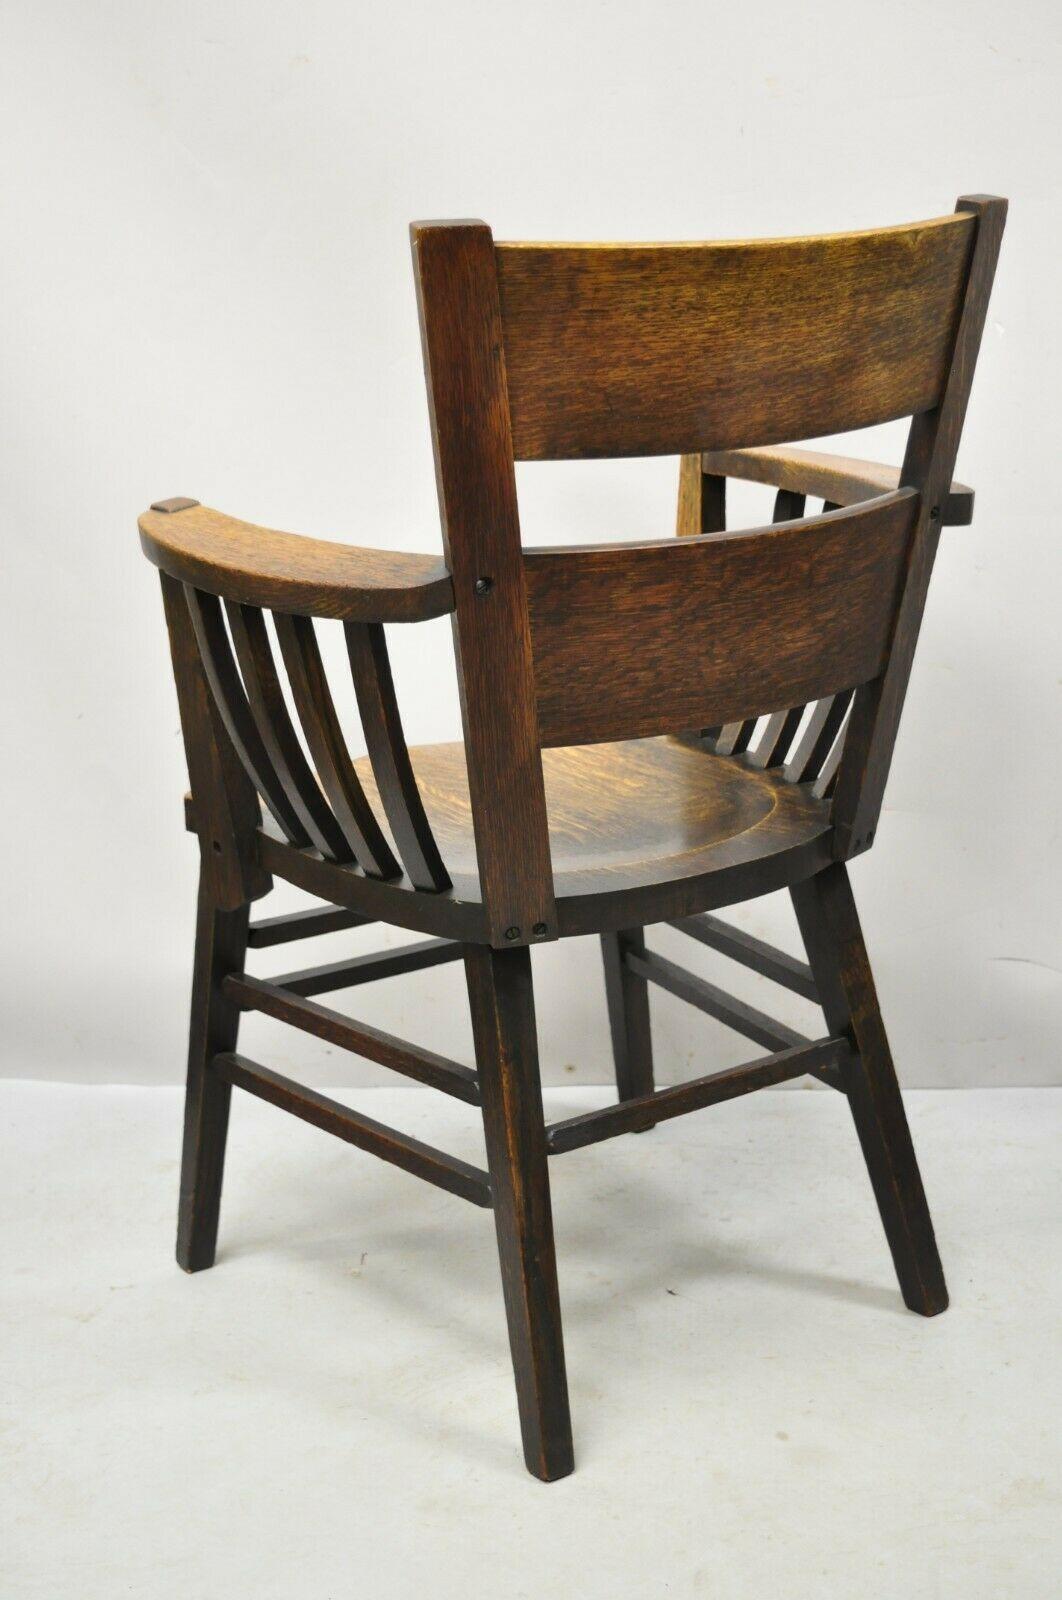 Antique Arts & Crafts Mission Oak Bowed Spindle Plank Seat Arm Chair For Sale 7